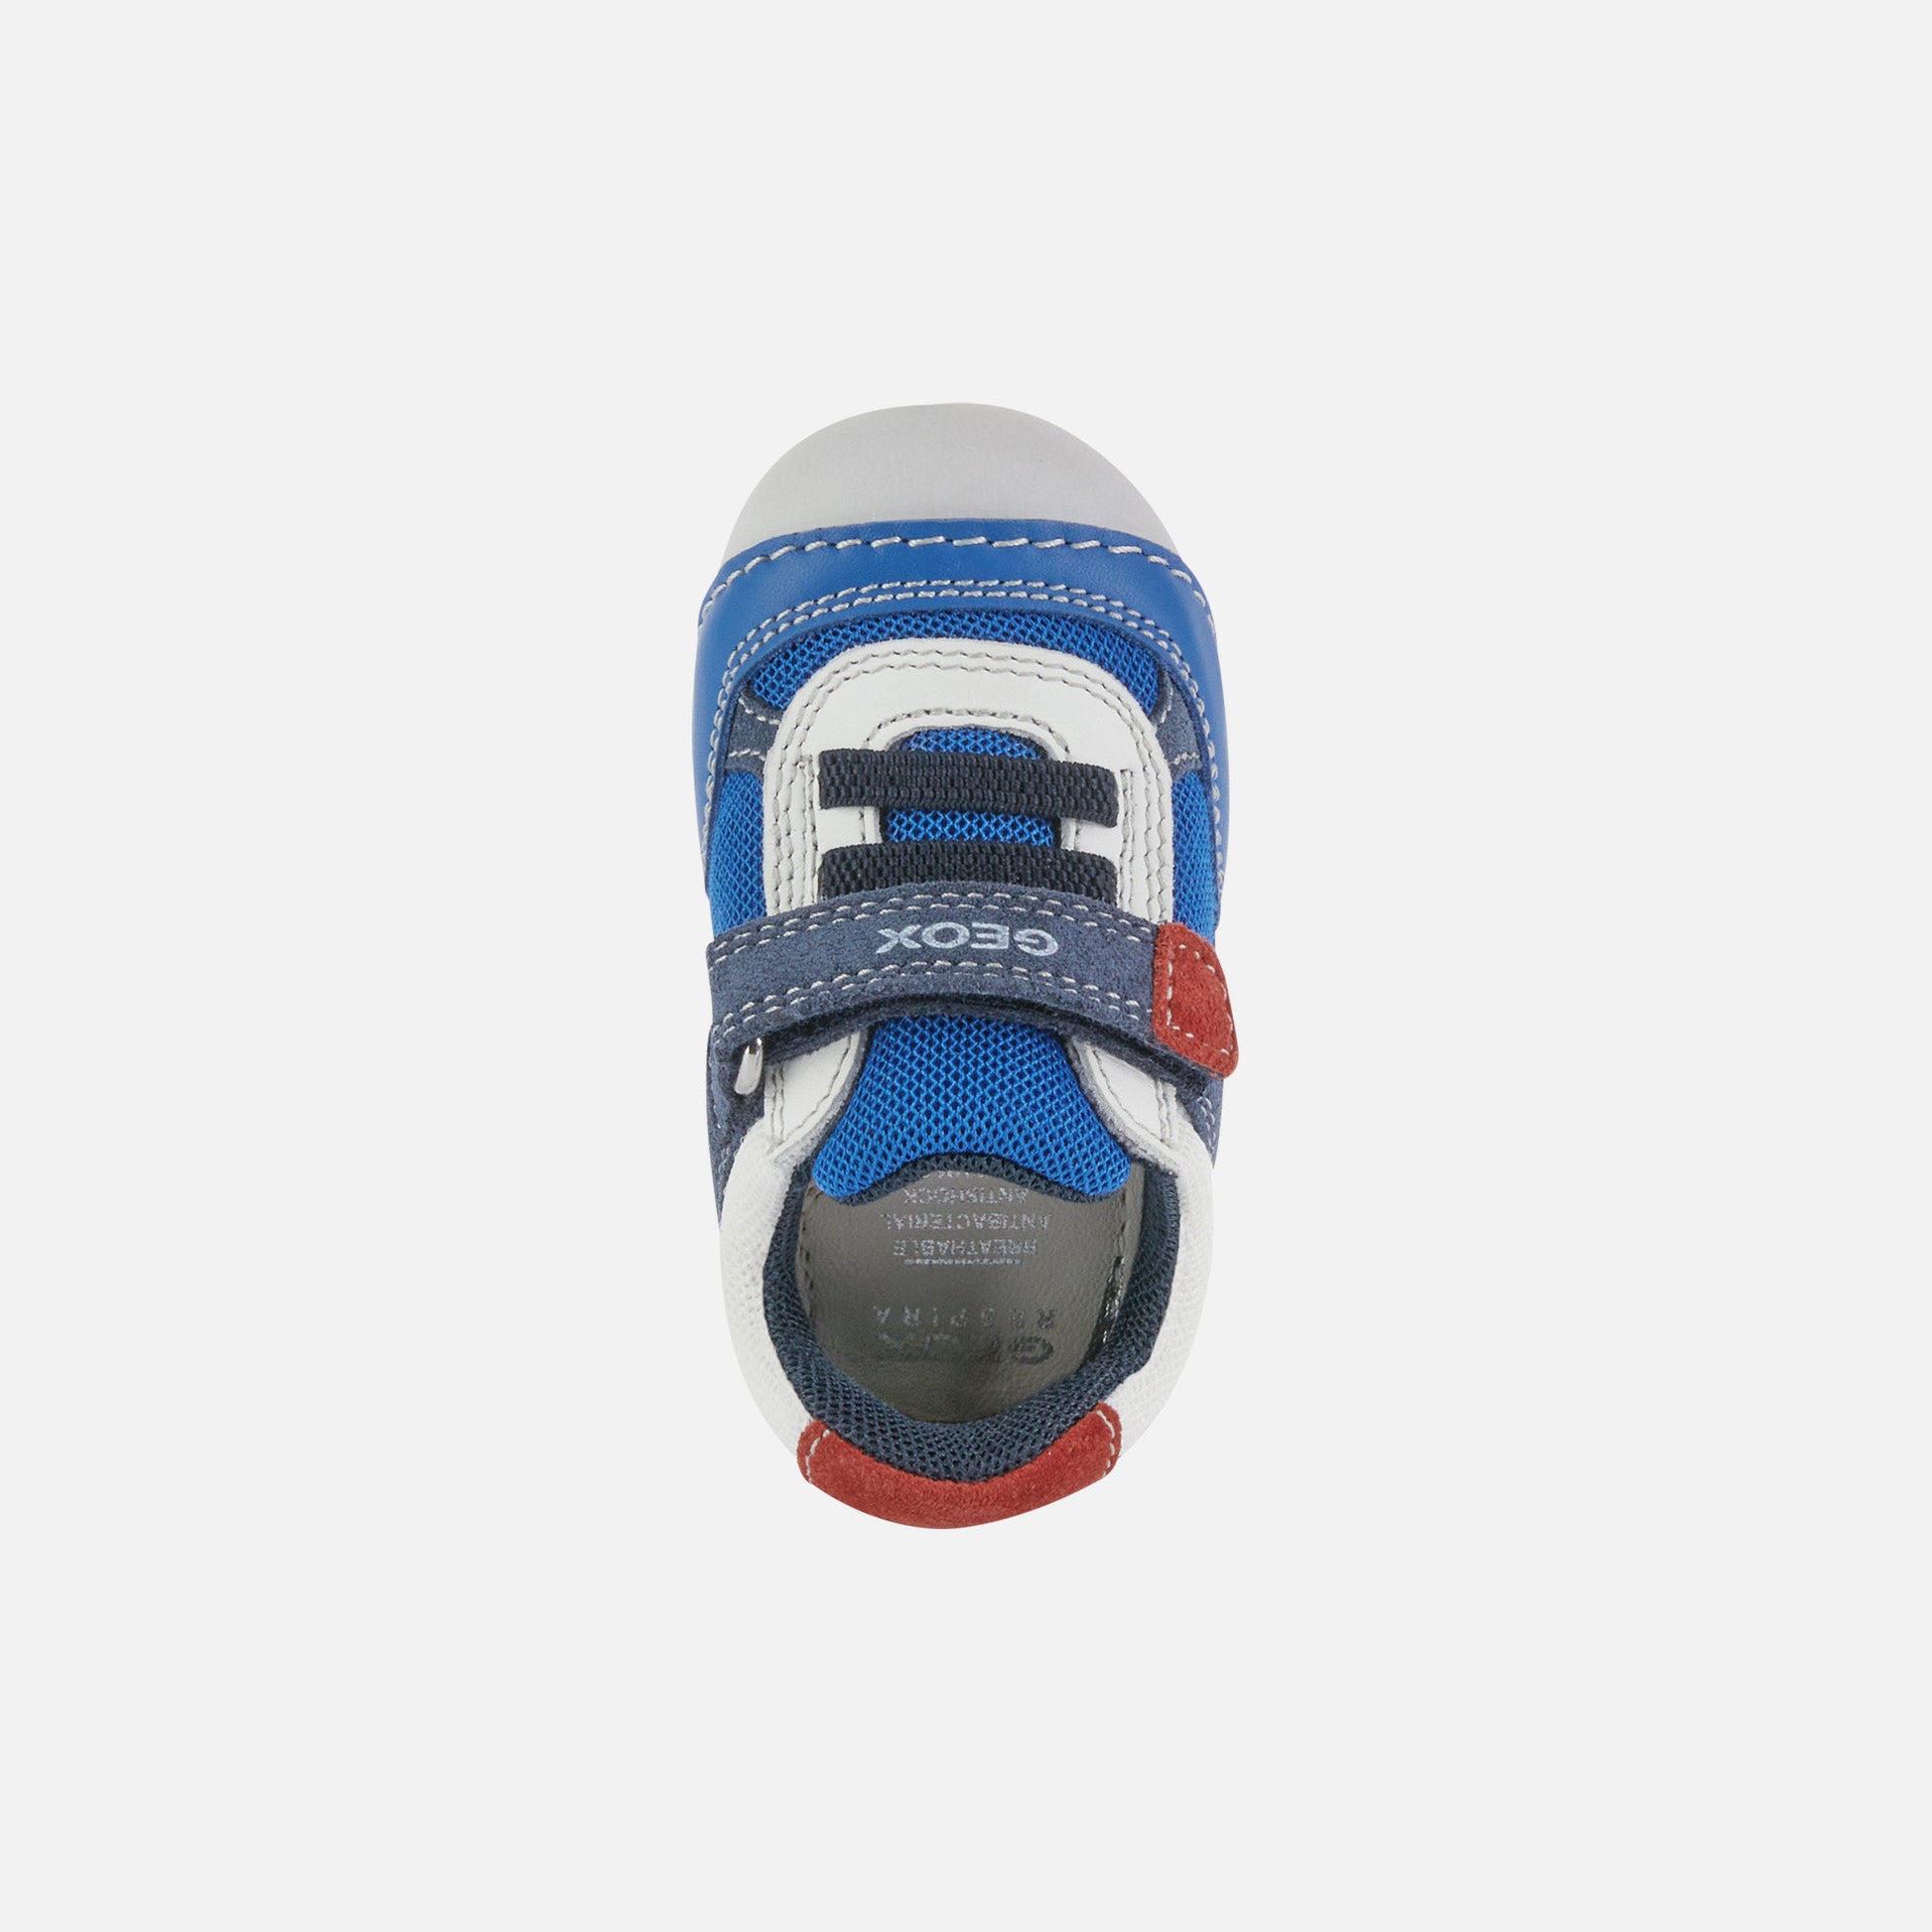 A boys pre walker by Geox, style Tutim, in blue, white and red with velcro fastening. Above view.